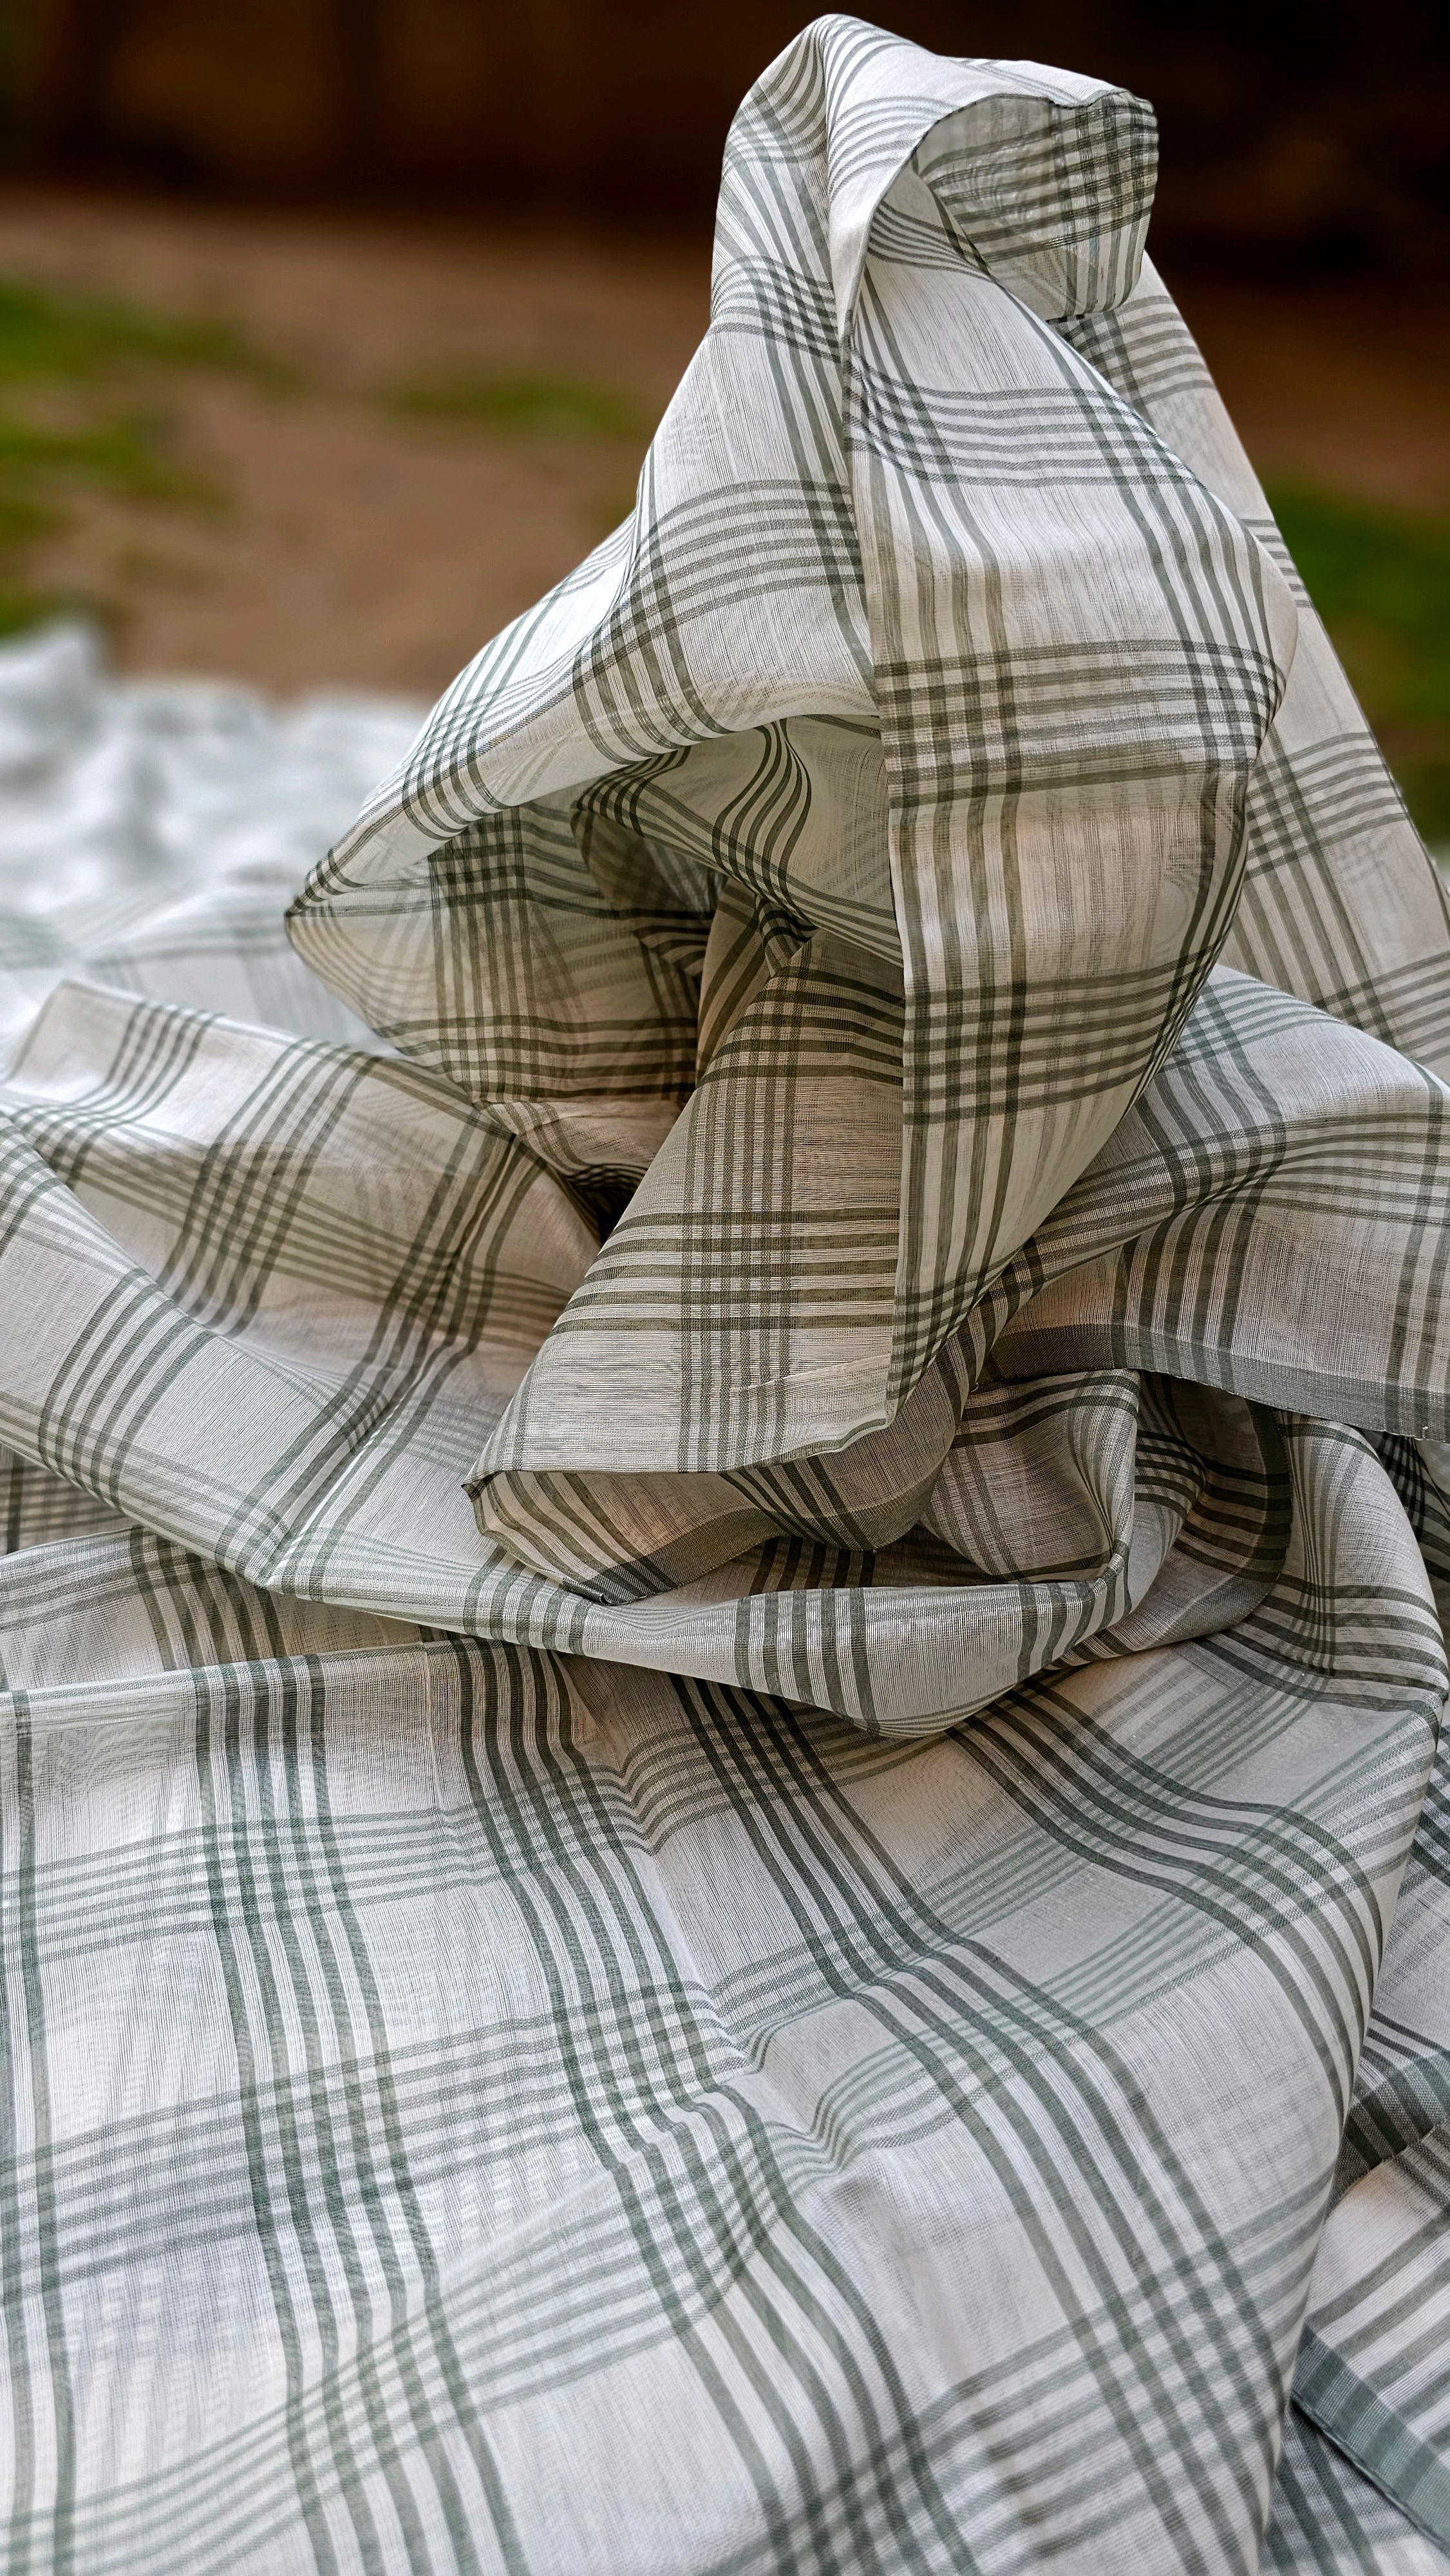 Fabric with Checks of Military Green and Off White.